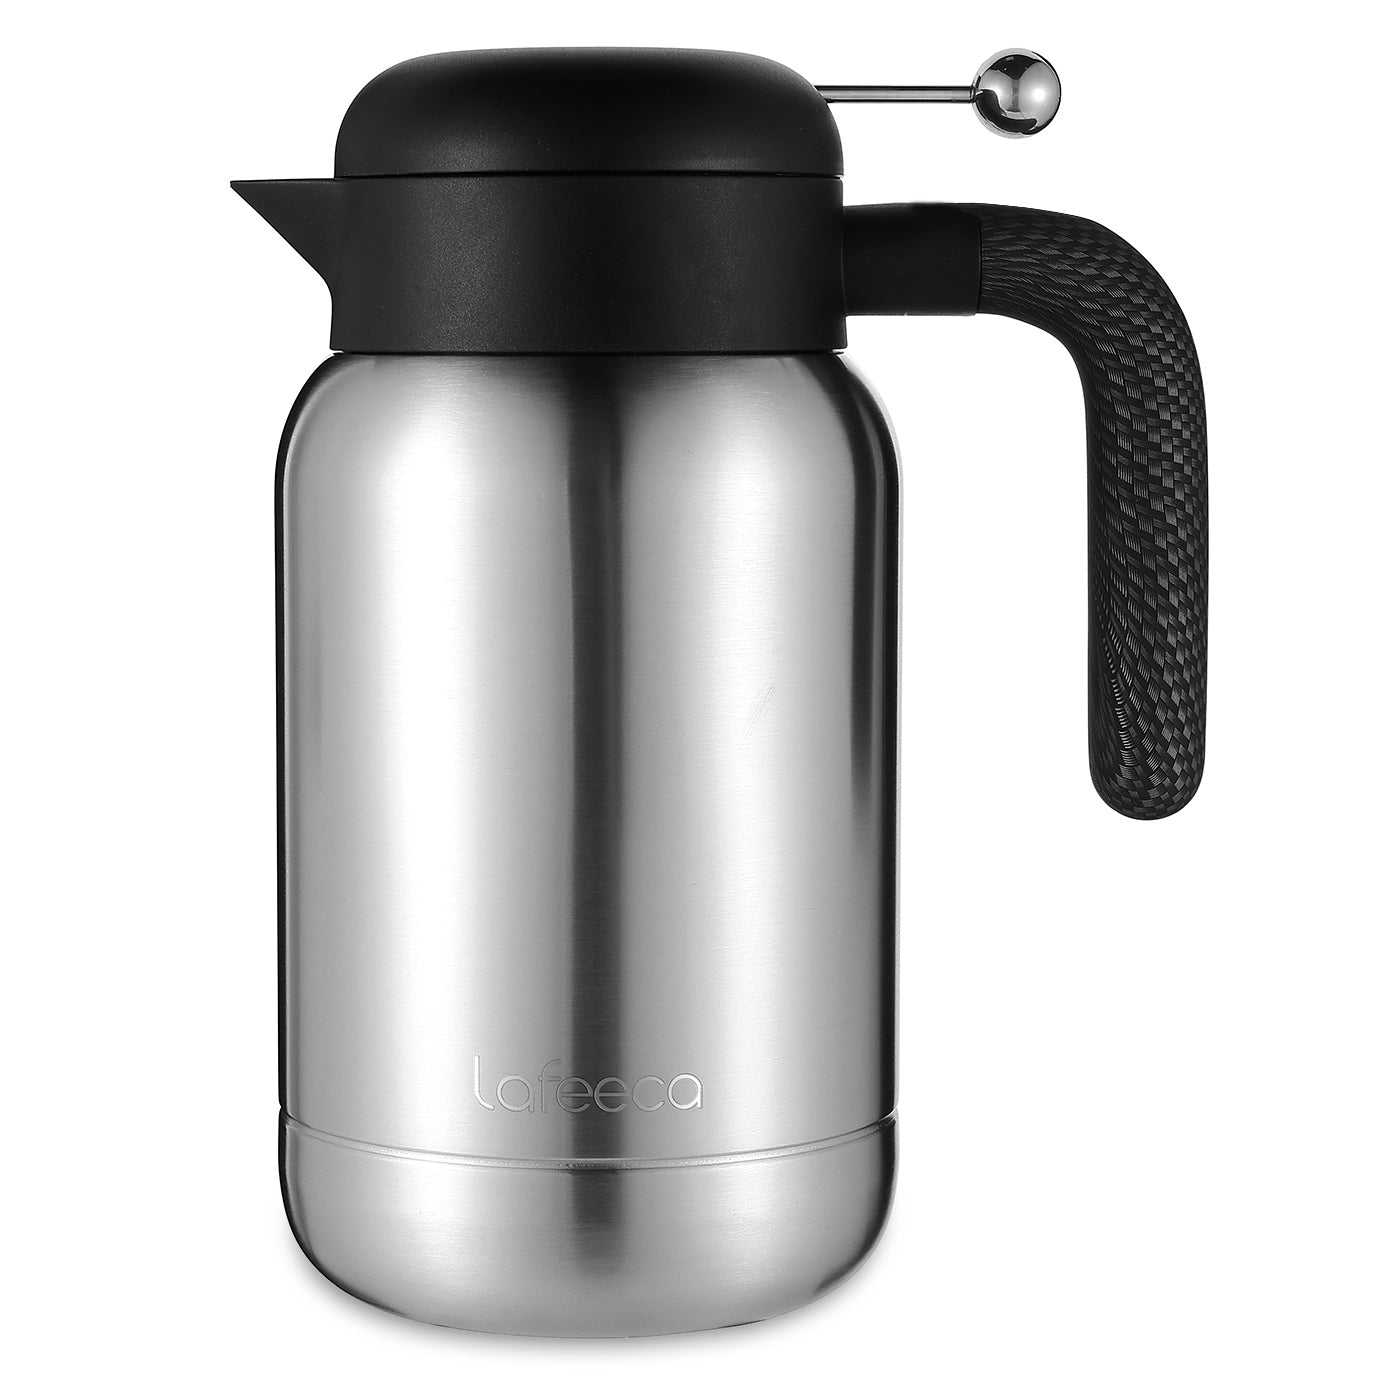 DUIERA iSH09-M609559mn 51 oz Coffee Carafe Double Walled Thermal